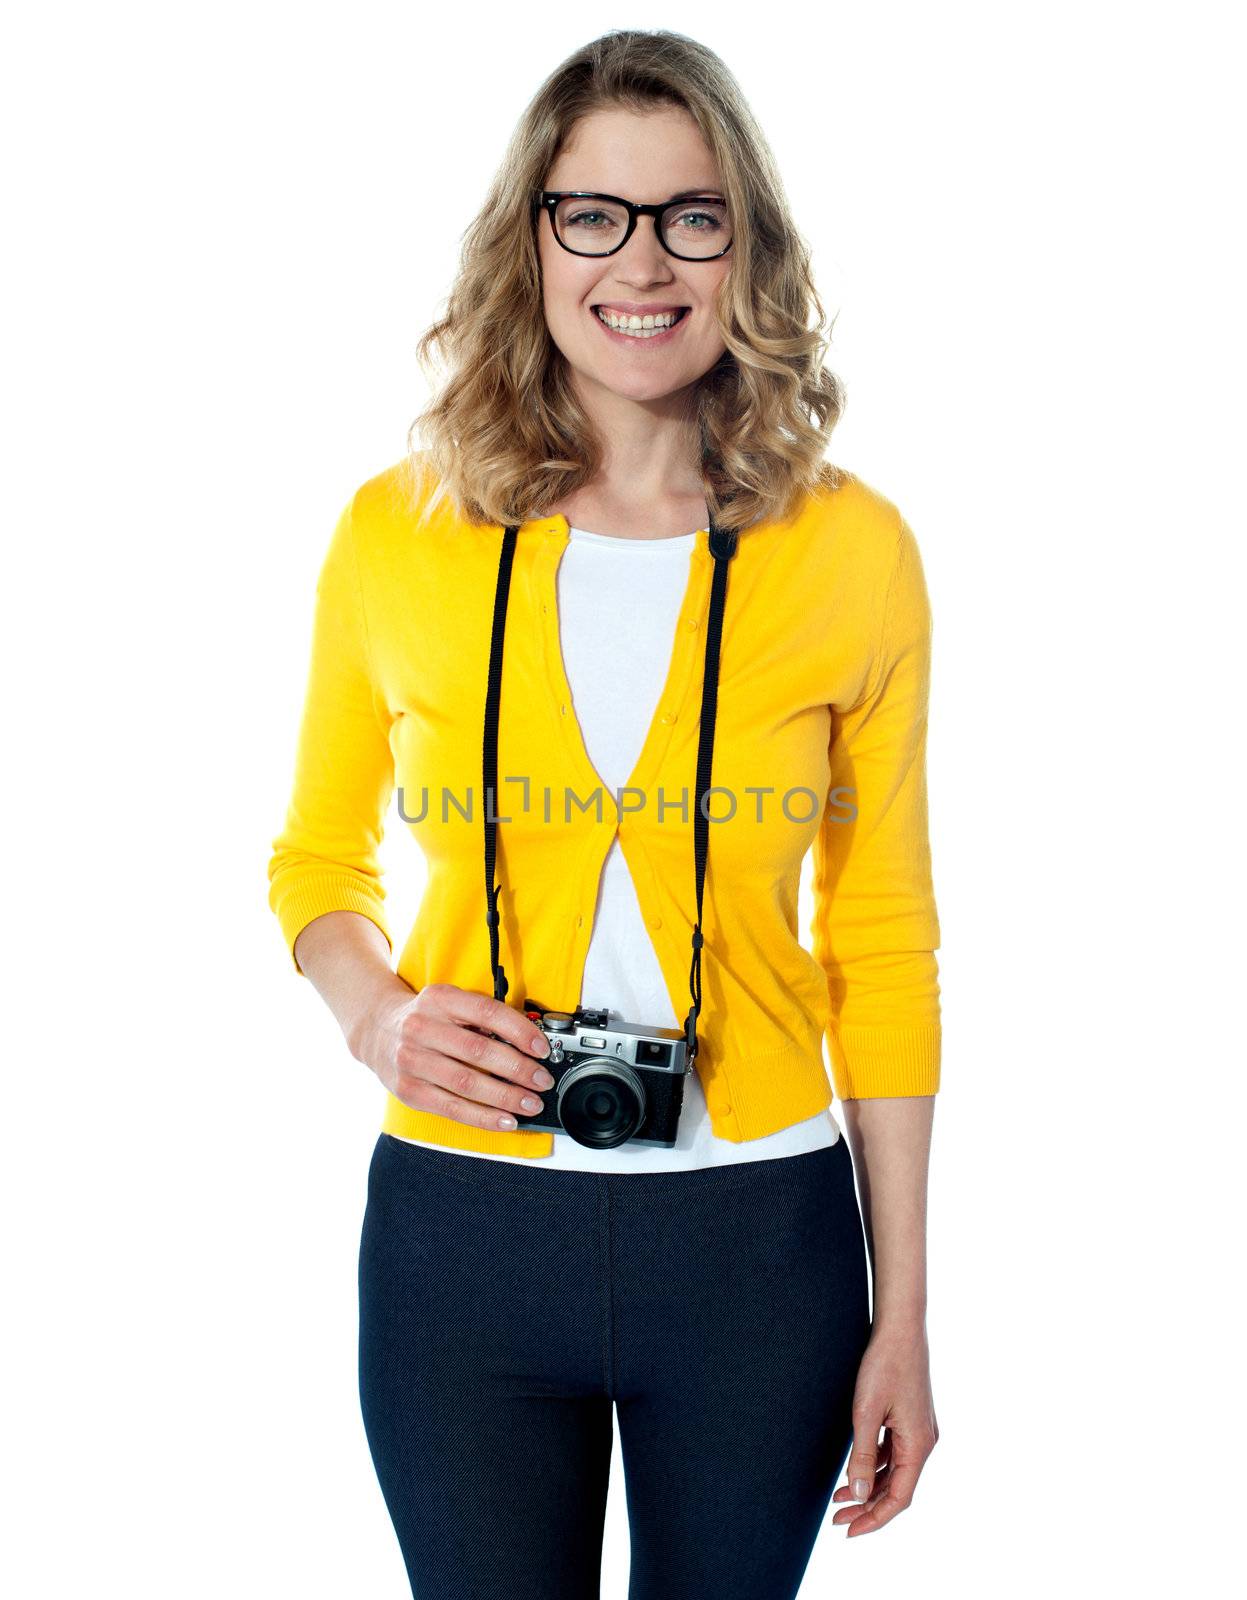 Attractive young girl with a camera over white background